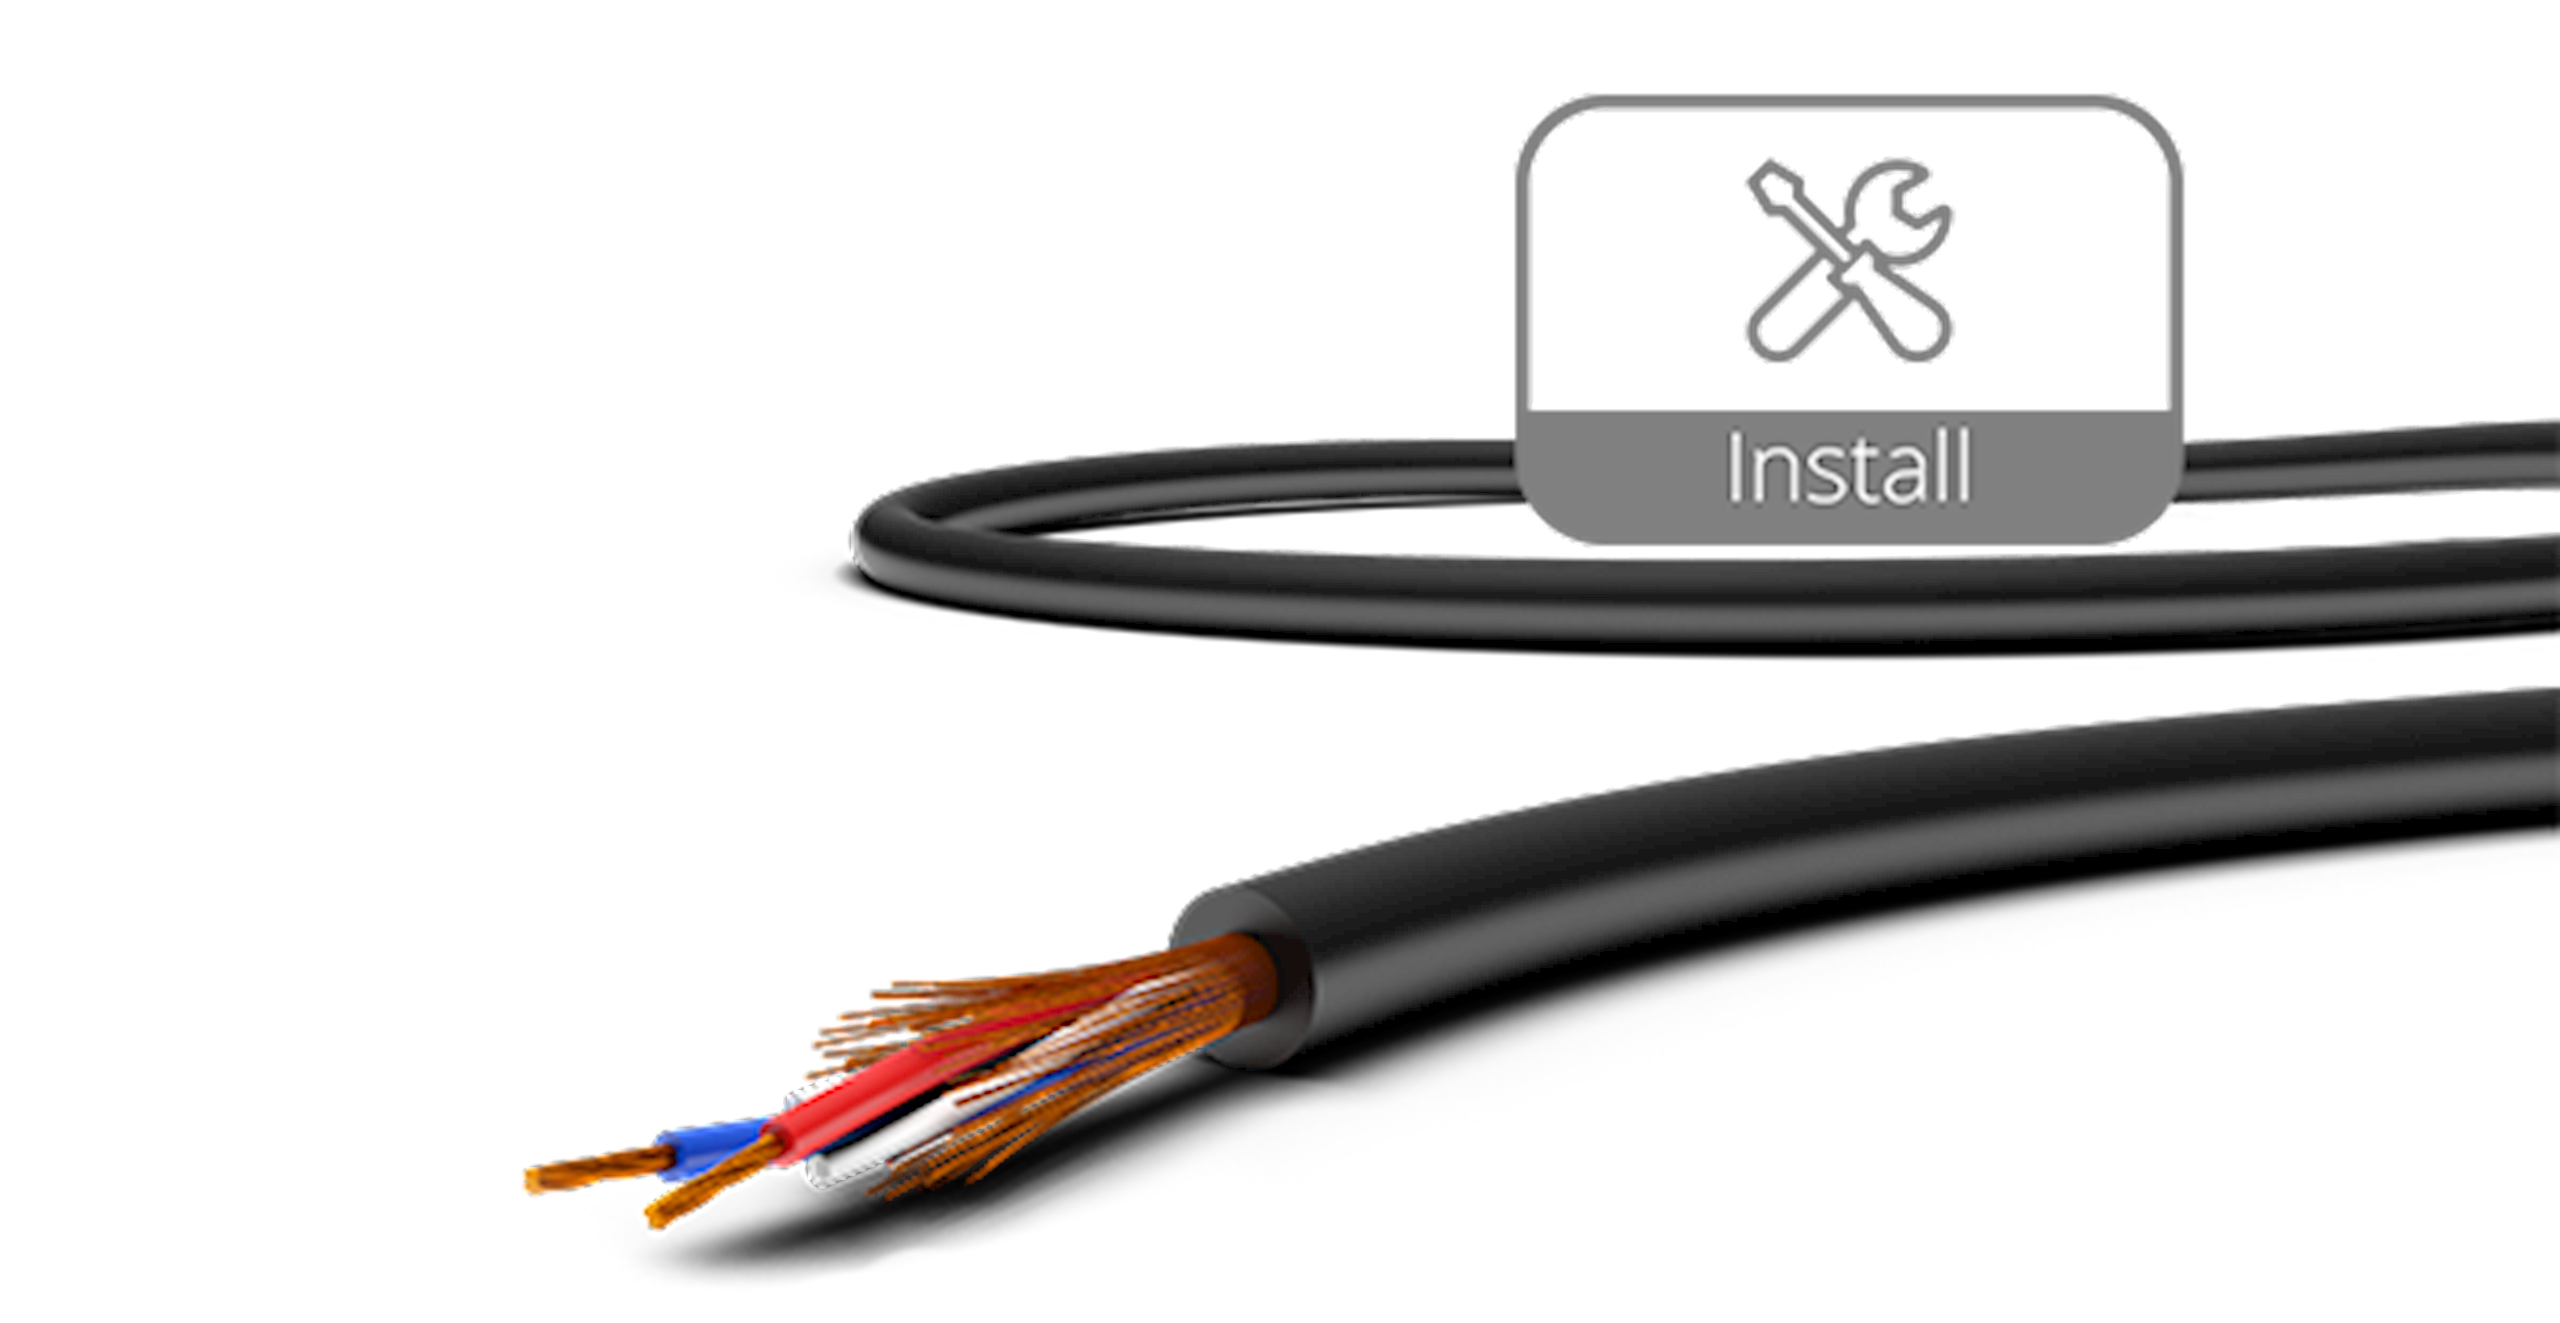 electricity clipart network cable